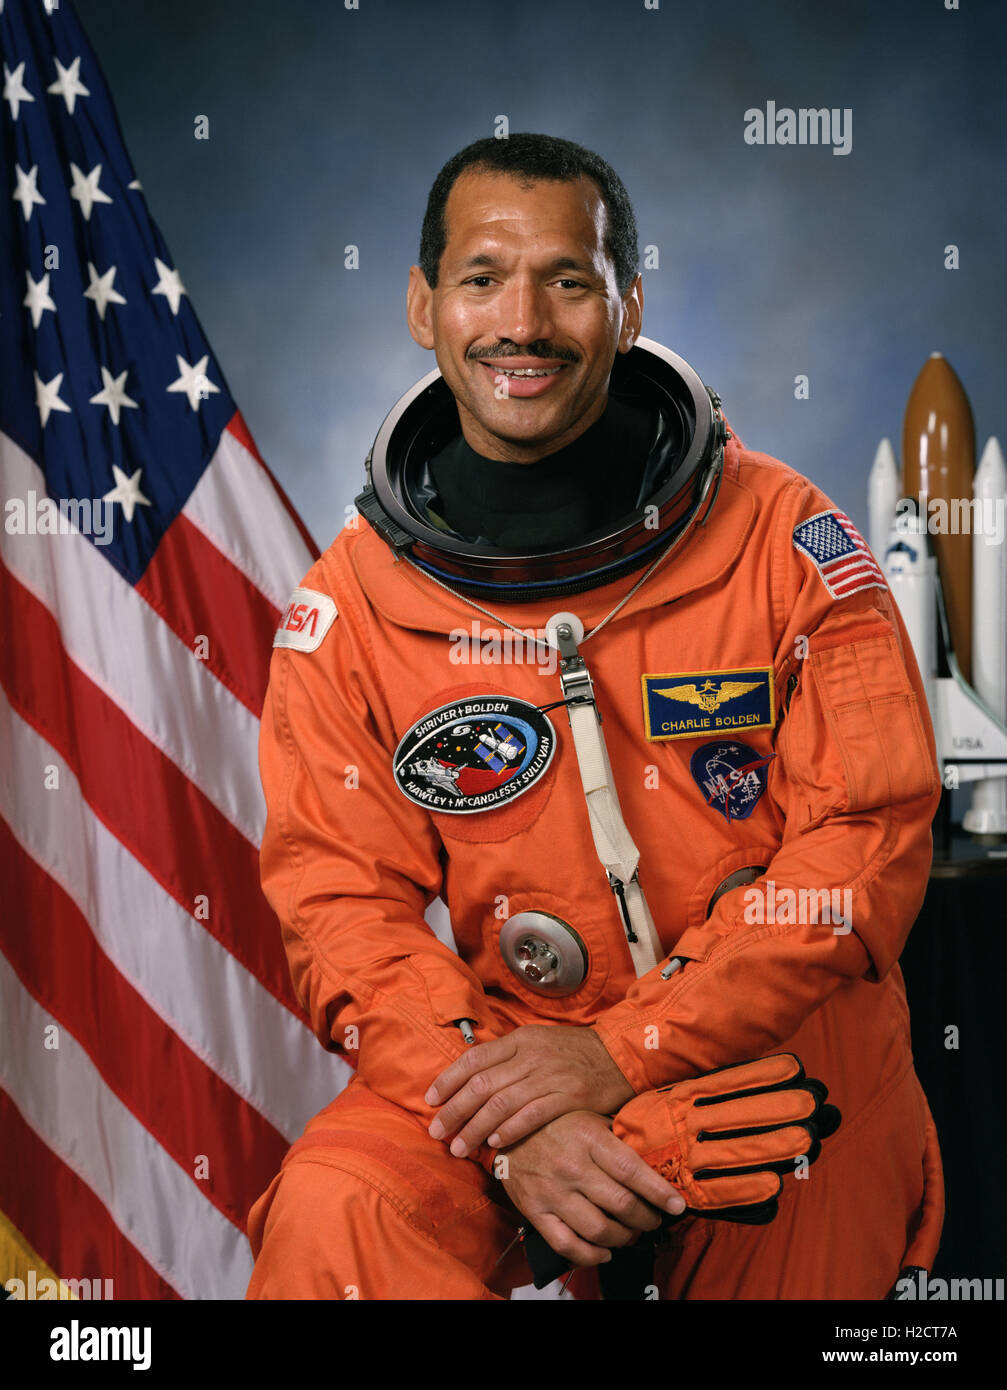 Official portrait of NASA astronaut Charles Bolden Jr. wearing an orange launch and entry space suit October 17, 1991. Bolden is the current NASA administrator and was the first African-American to head the agency on a permanent basis. Stock Photo